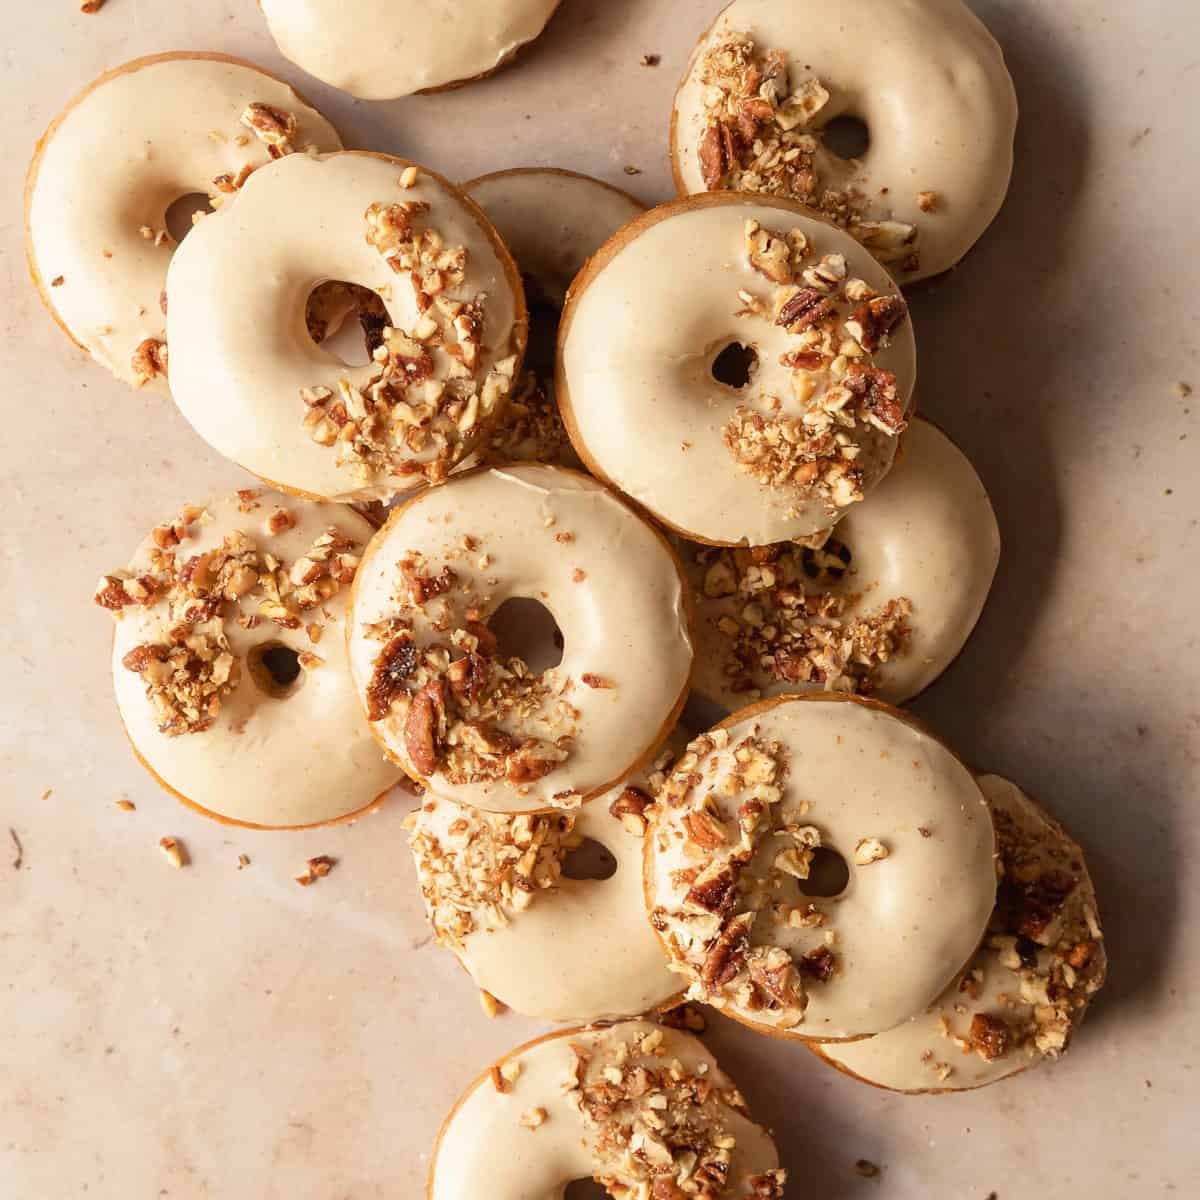 https://olivesnthyme.com/wp-content/uploads/2022/09/Maple-Donuts-22-scaled.jpg